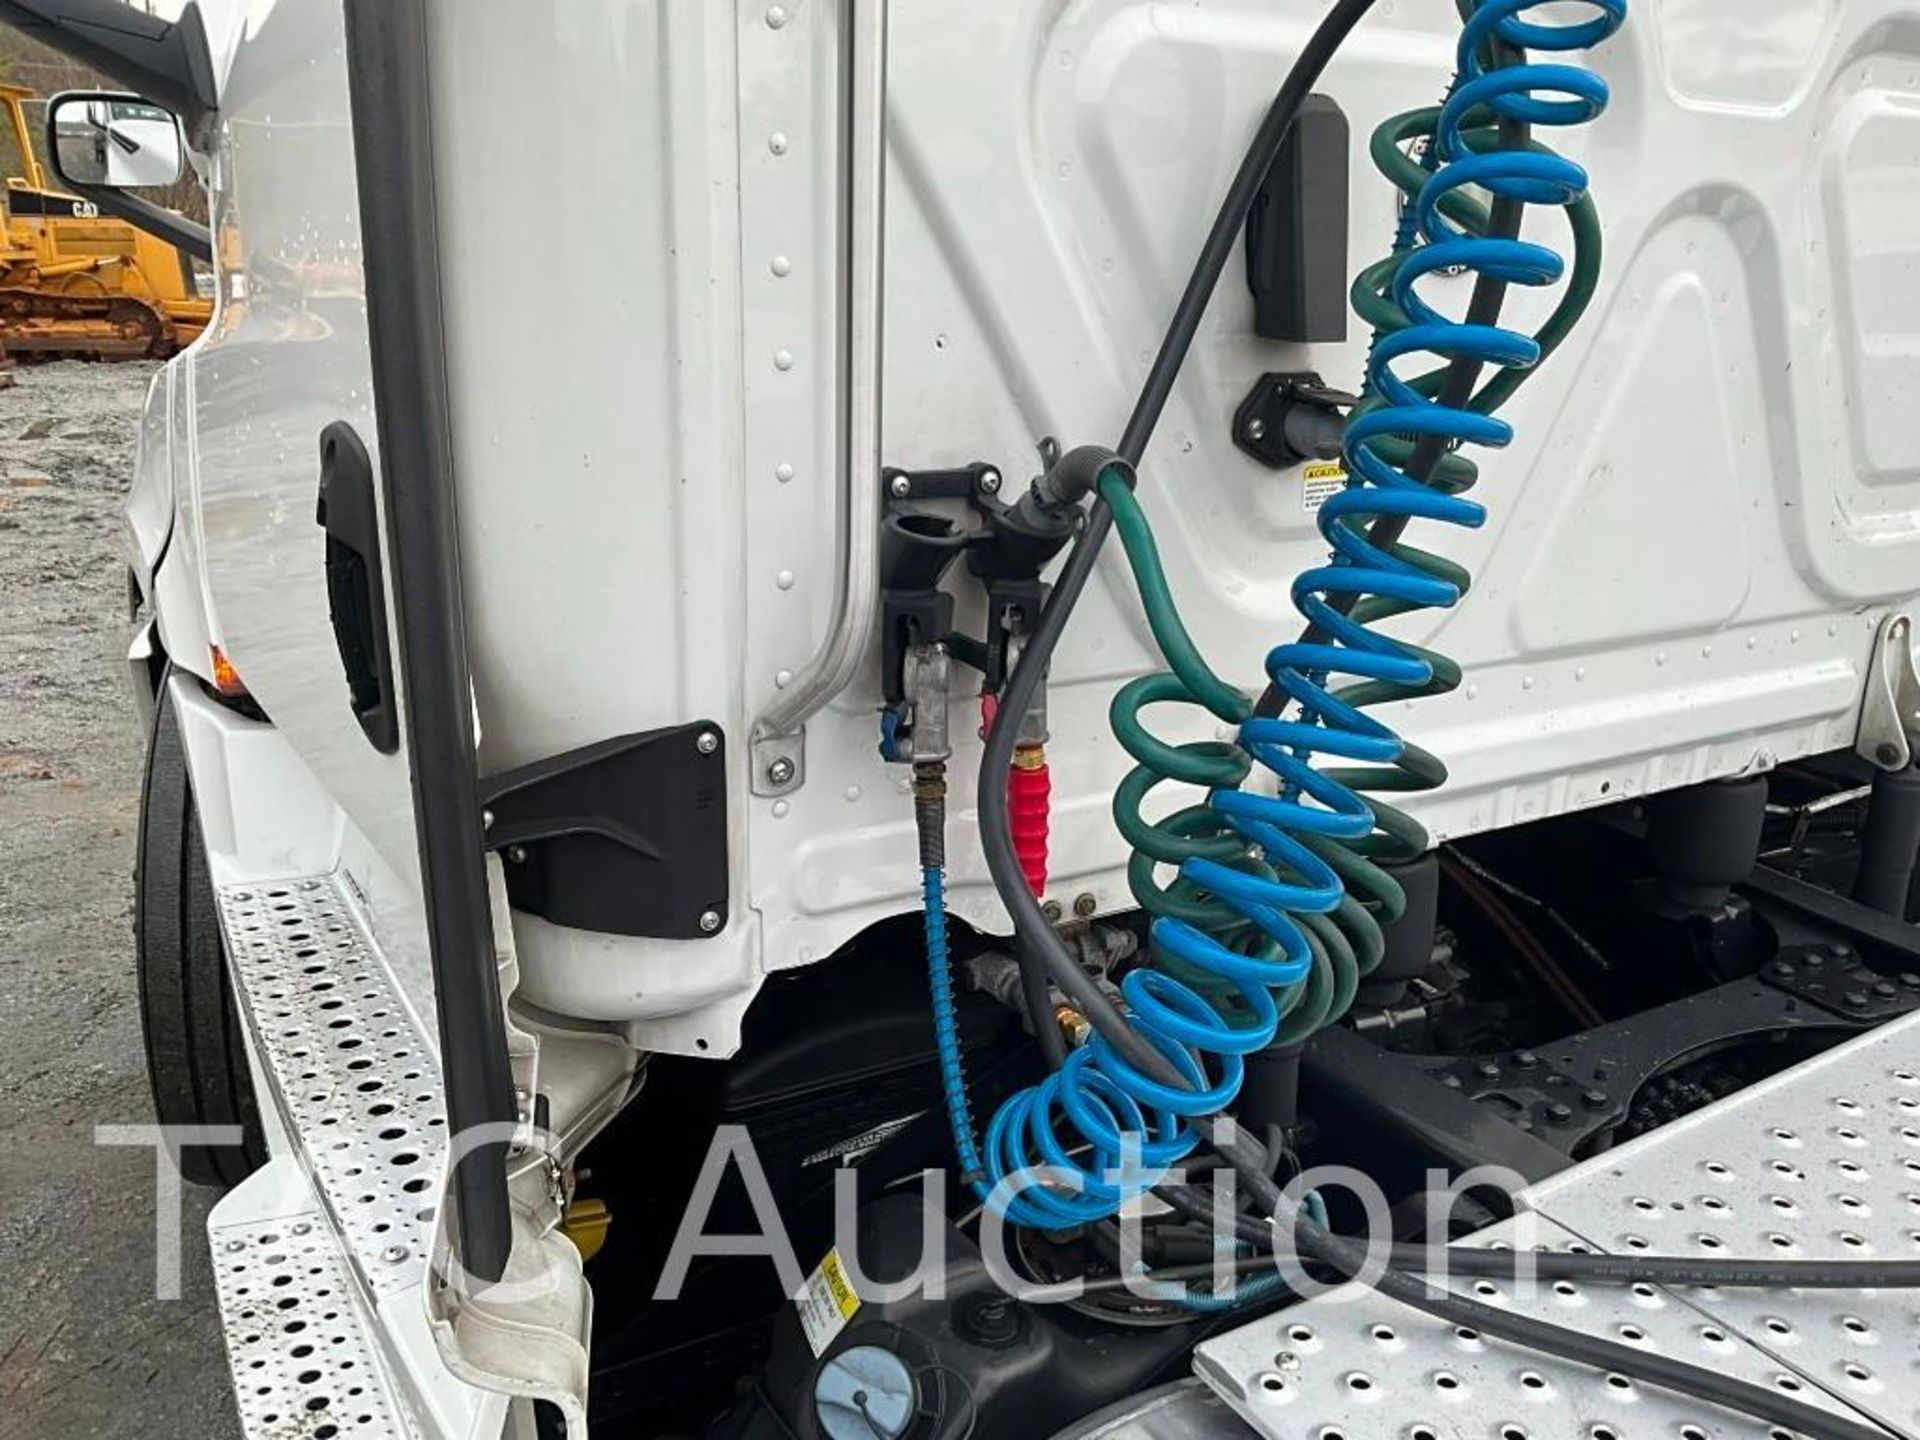 2019 Freightliner Cascadia Day Cab - Image 33 of 54